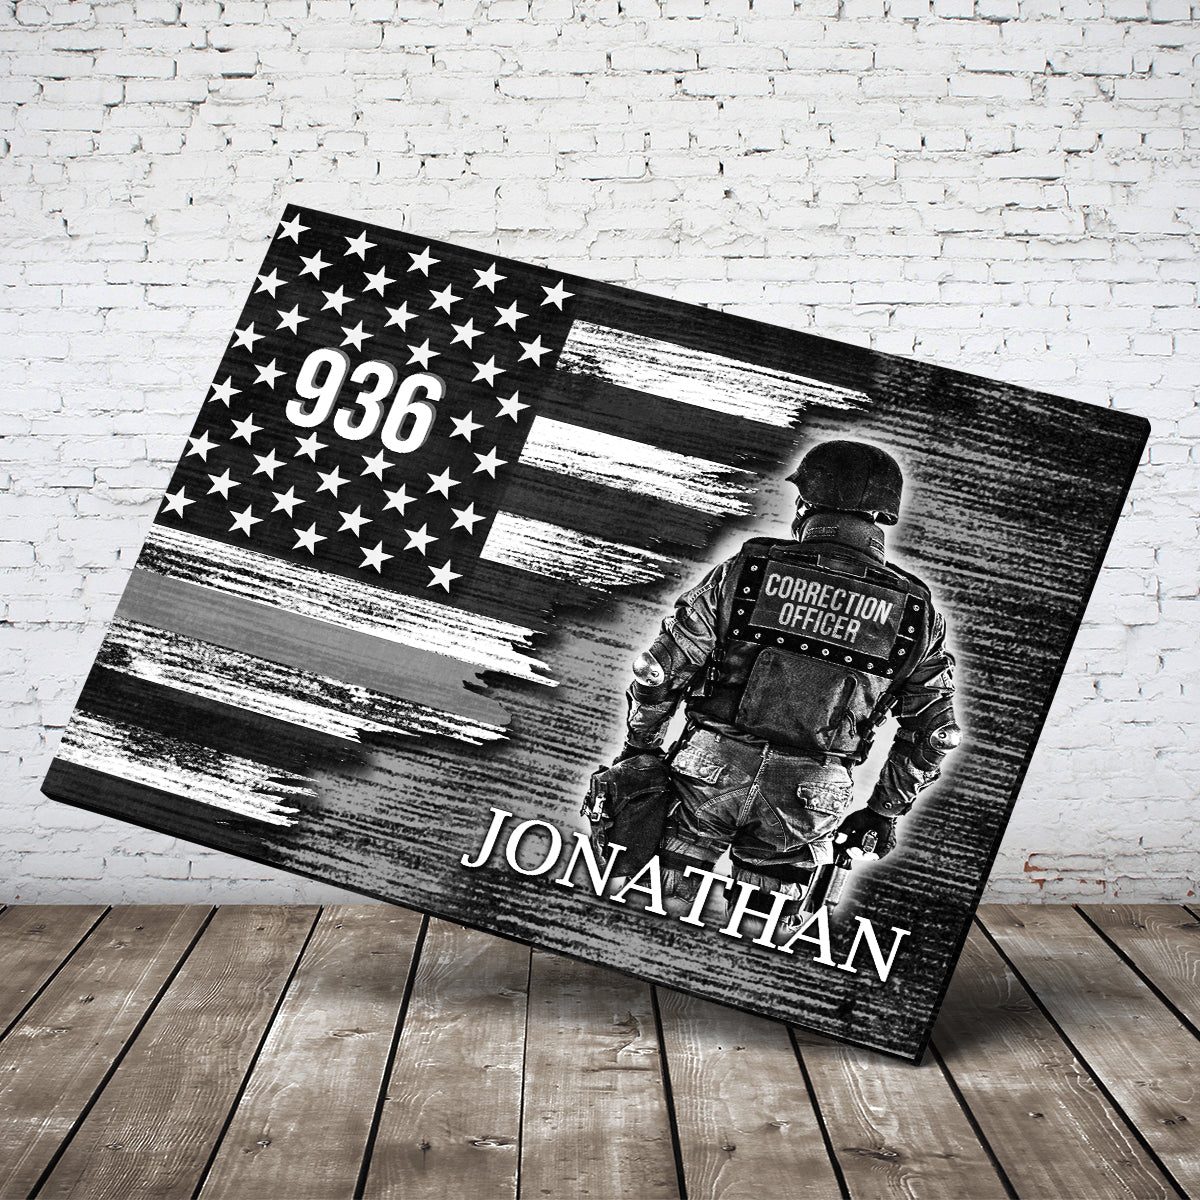 Personalized Custom Name Correctional Badge Number Correction Officer Prayer Thin Silver Grey Gray Line American Flag Canvas